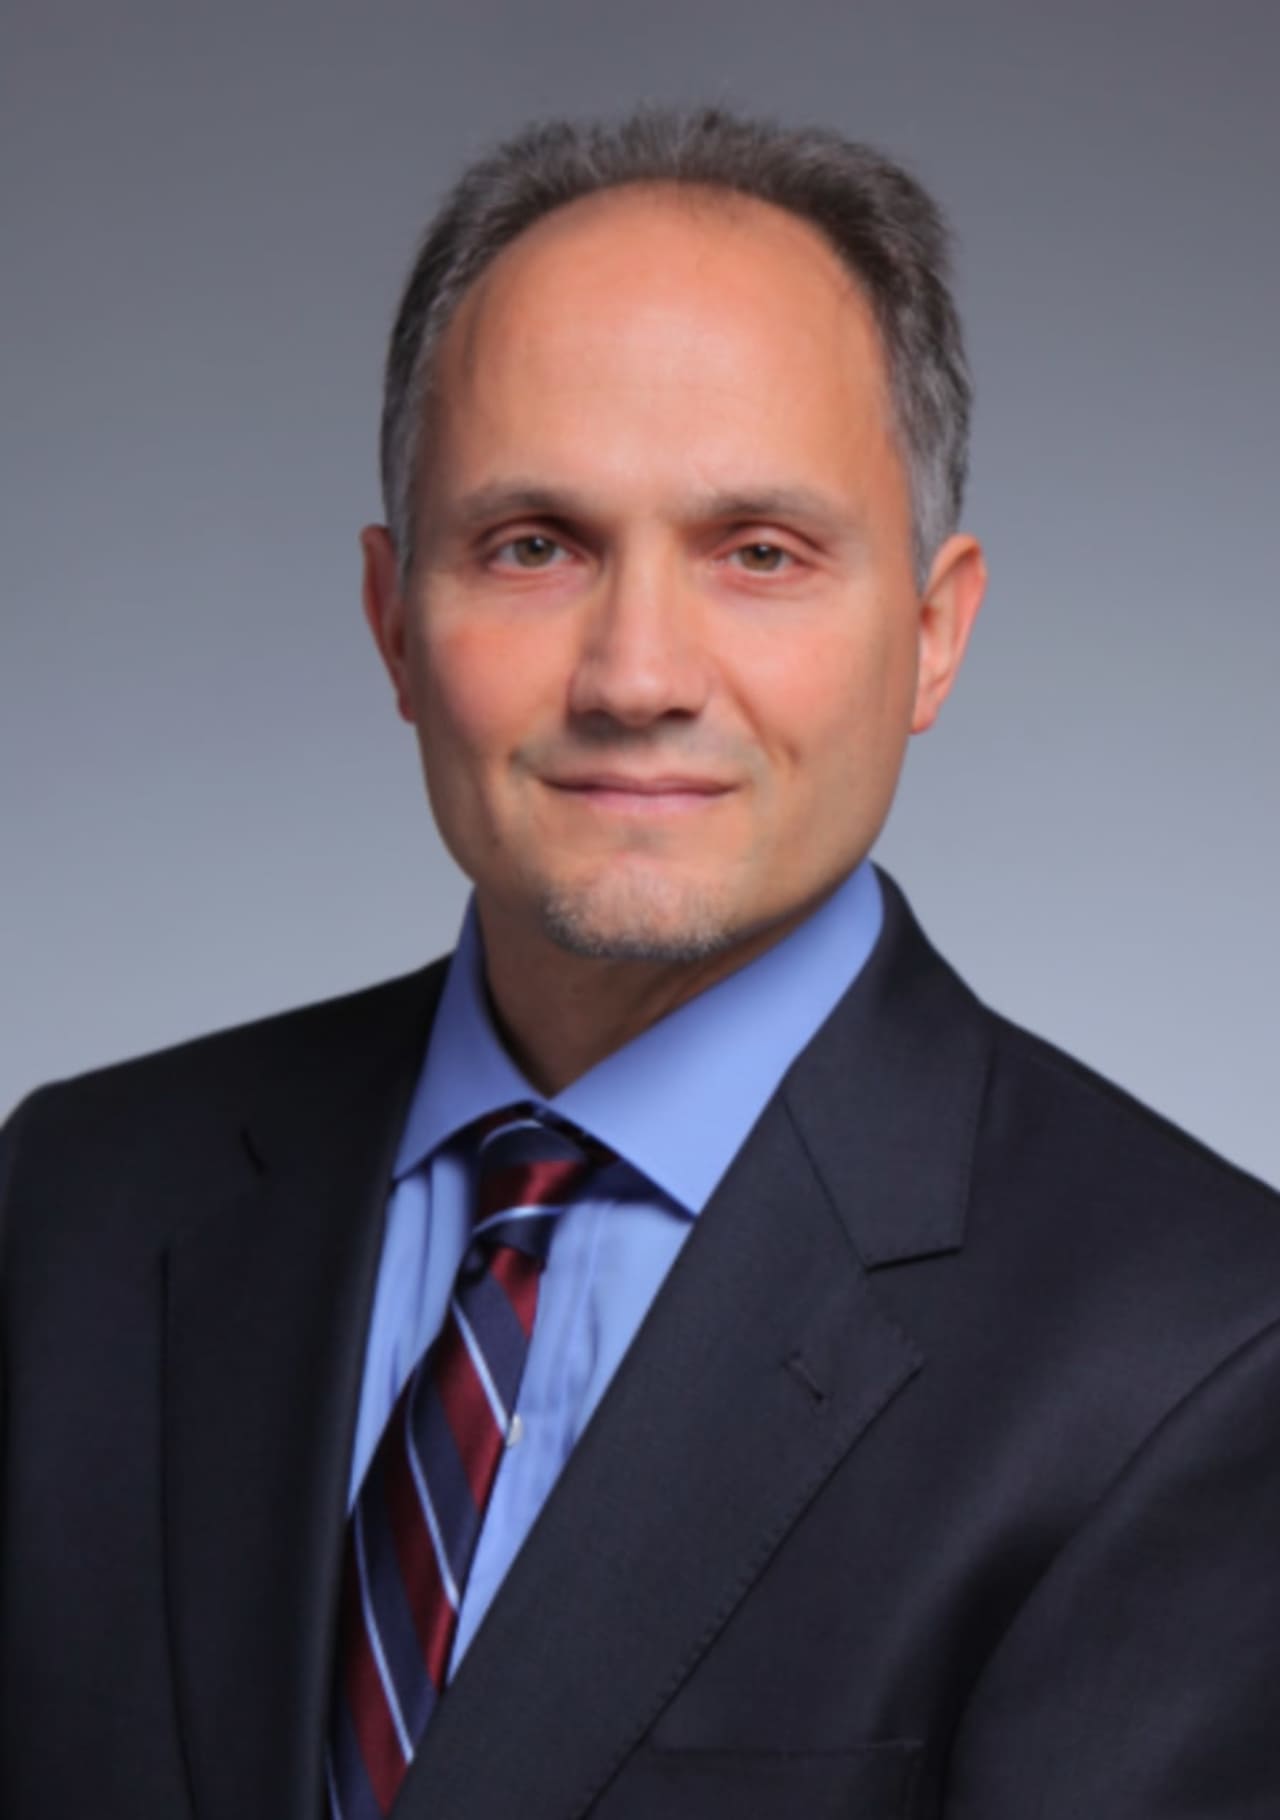 New Canaan resident Robert J. Femia, MD, MBA, has been named chair of the Ronald O. Perelman Department of Emergency Medicine at NYU Langone Medical Center.